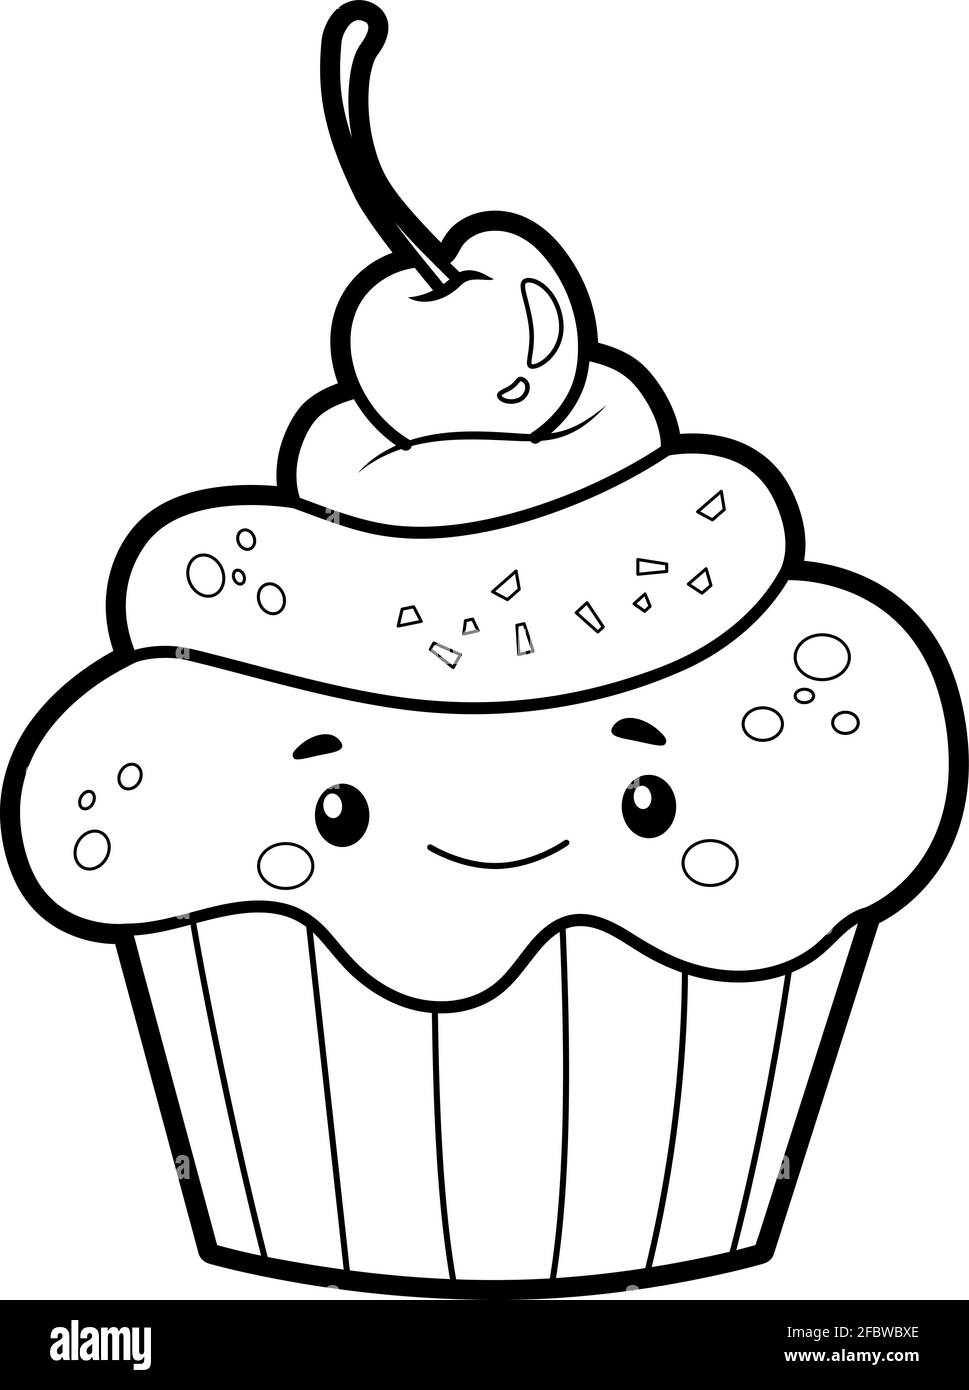 Cup Cake Coloring Book For Kids: Cup Cake Coloring Books for Kids Ages 4-8  - girls, boys, toddlers, Preschool and Kindergarten.